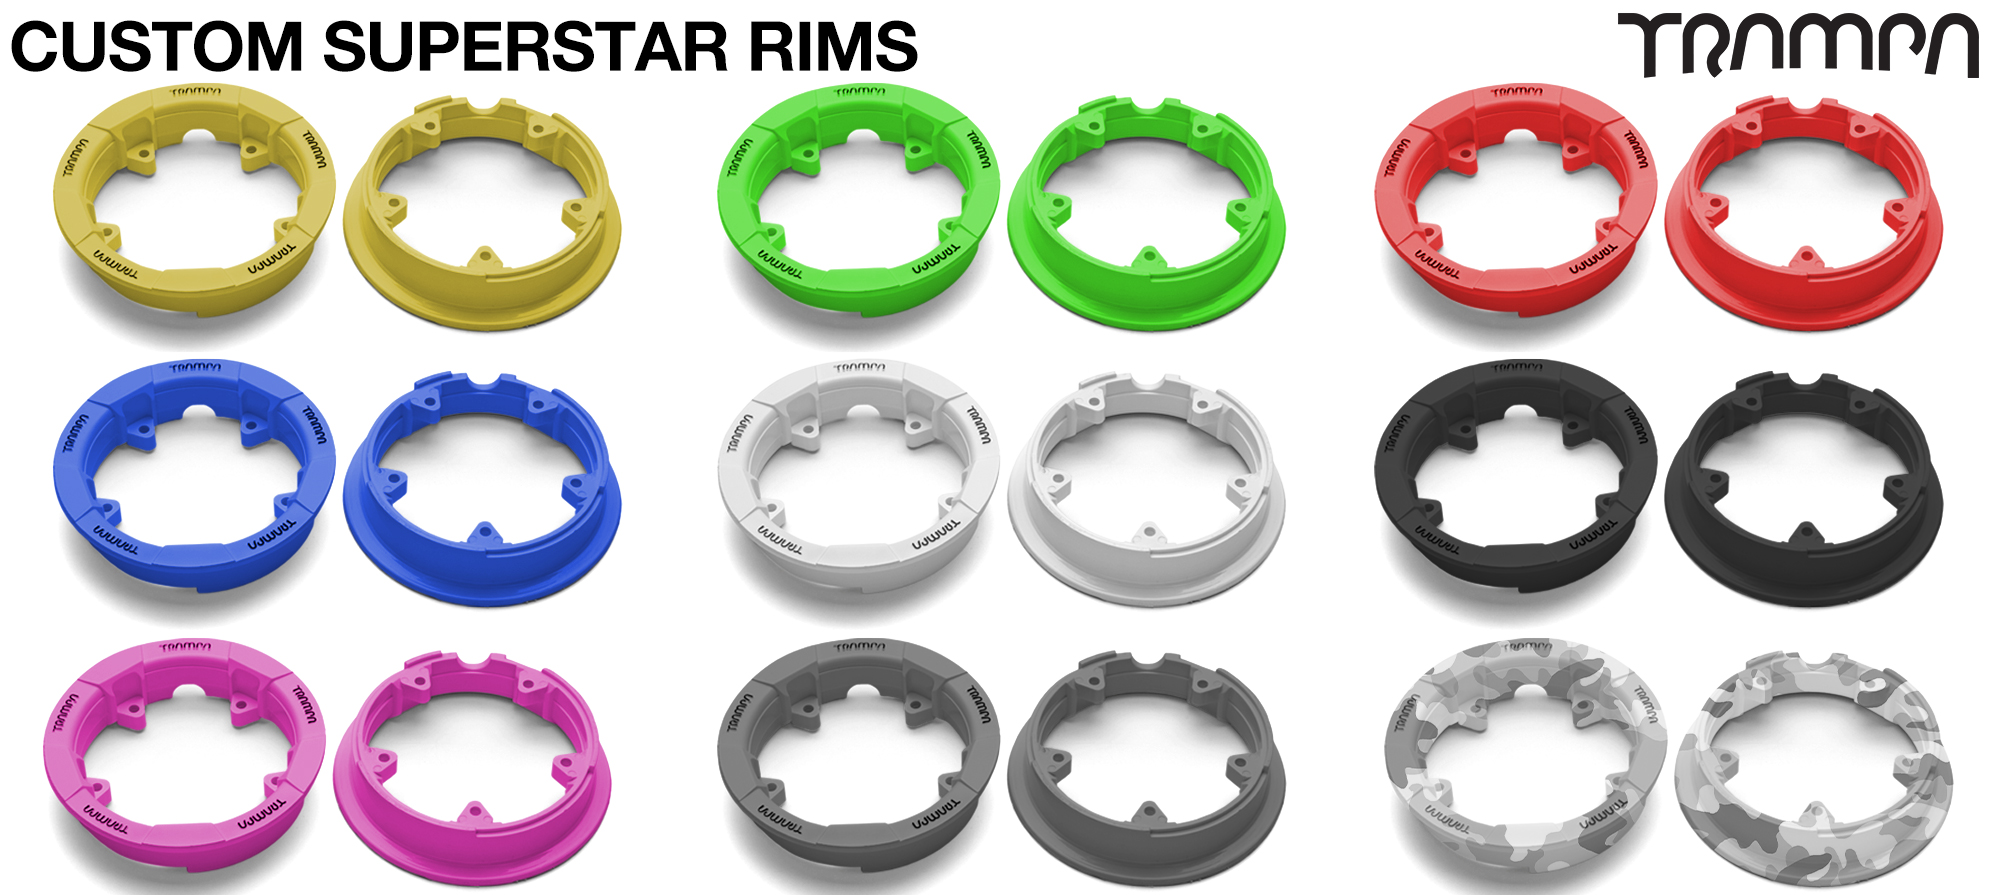 Set of 4 SUPERSTAR CENTER-SET Rims 3.75x 2 Inch fits all 3.75 Inch Tyres - CUSTOM